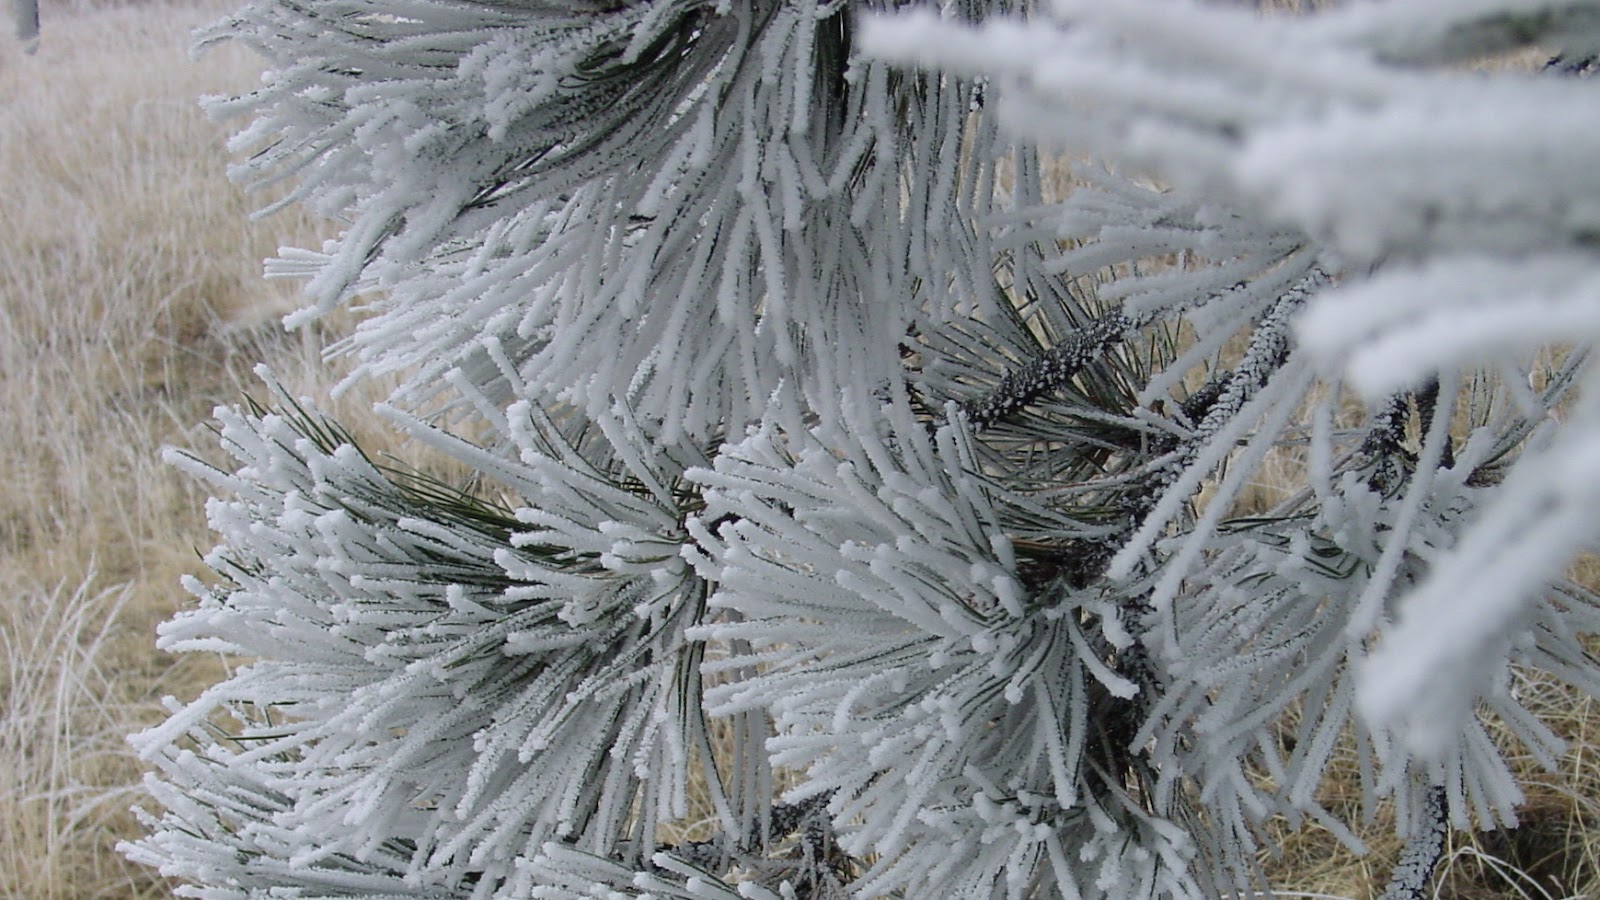 The frost on pine needles